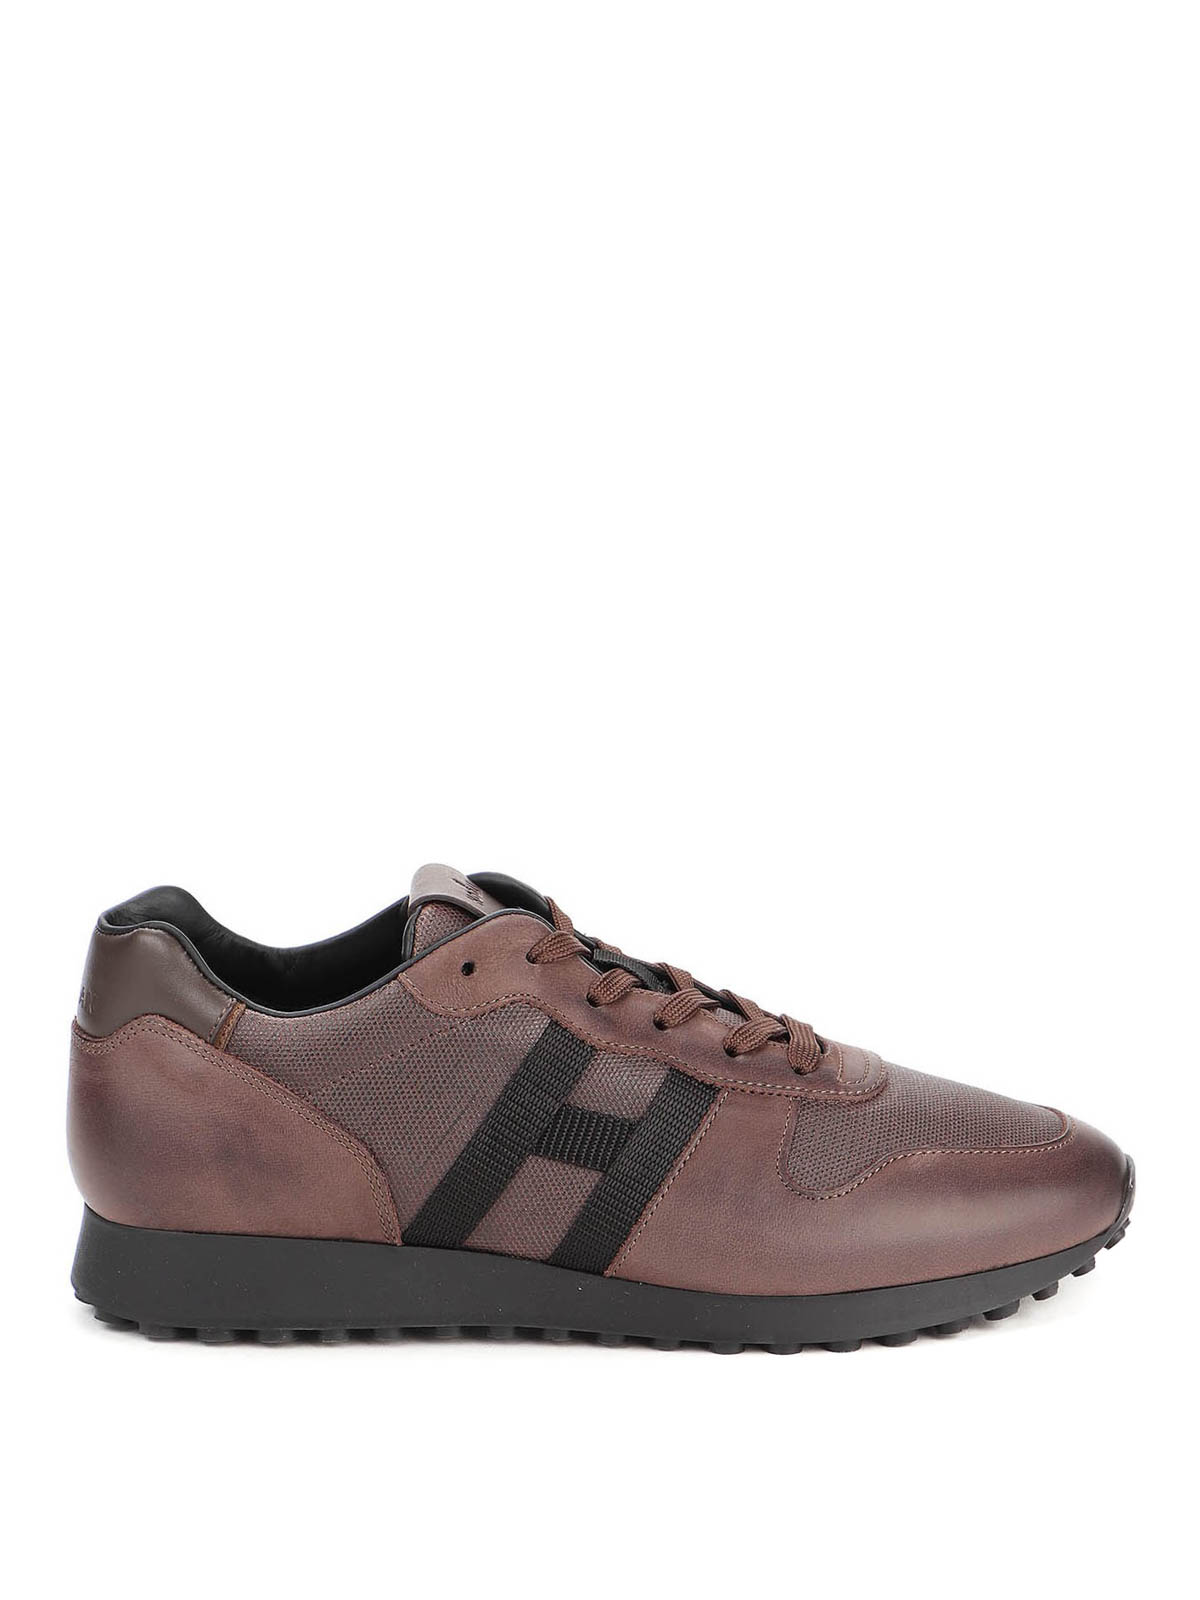 Trainers Hogan - H429 sneakers - HXM4290CZ62OEF65NH | Shop online at iKRIX